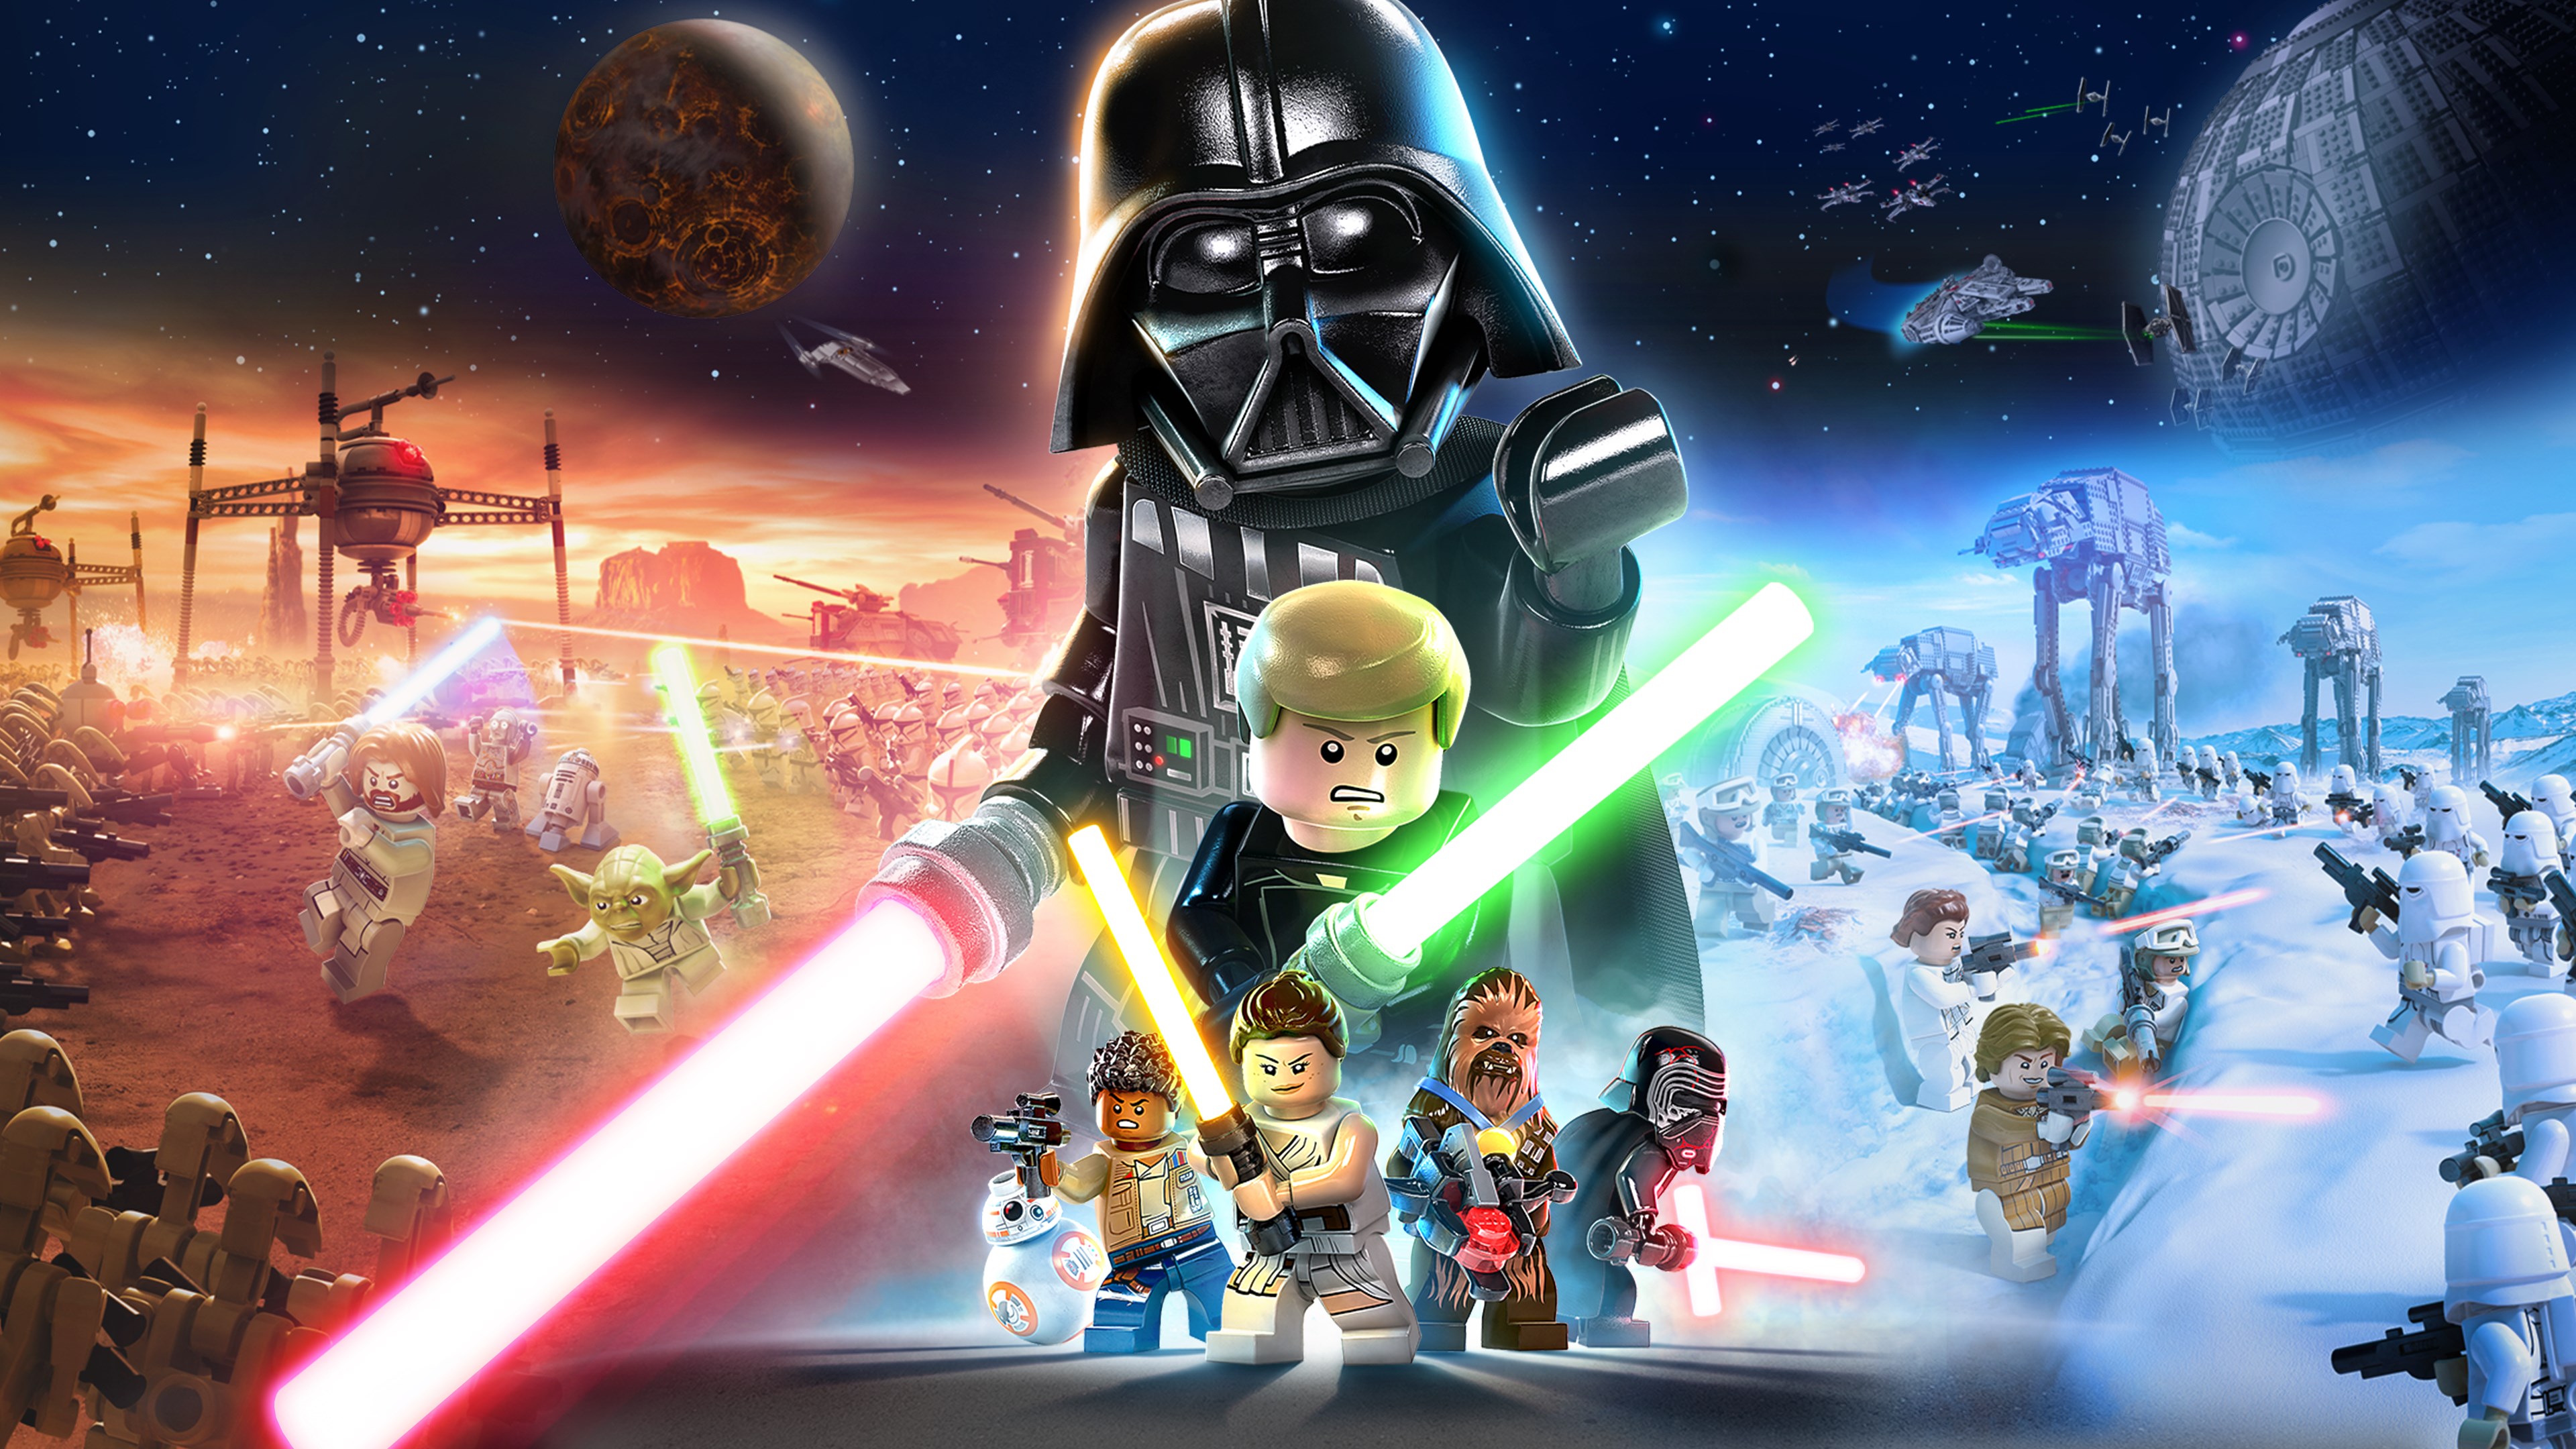 LEGO Star Wars: The Skywalker Saga Is Now Available For Digital
Pre-order And Pre-download On Xbox One And Xbox Series X|S